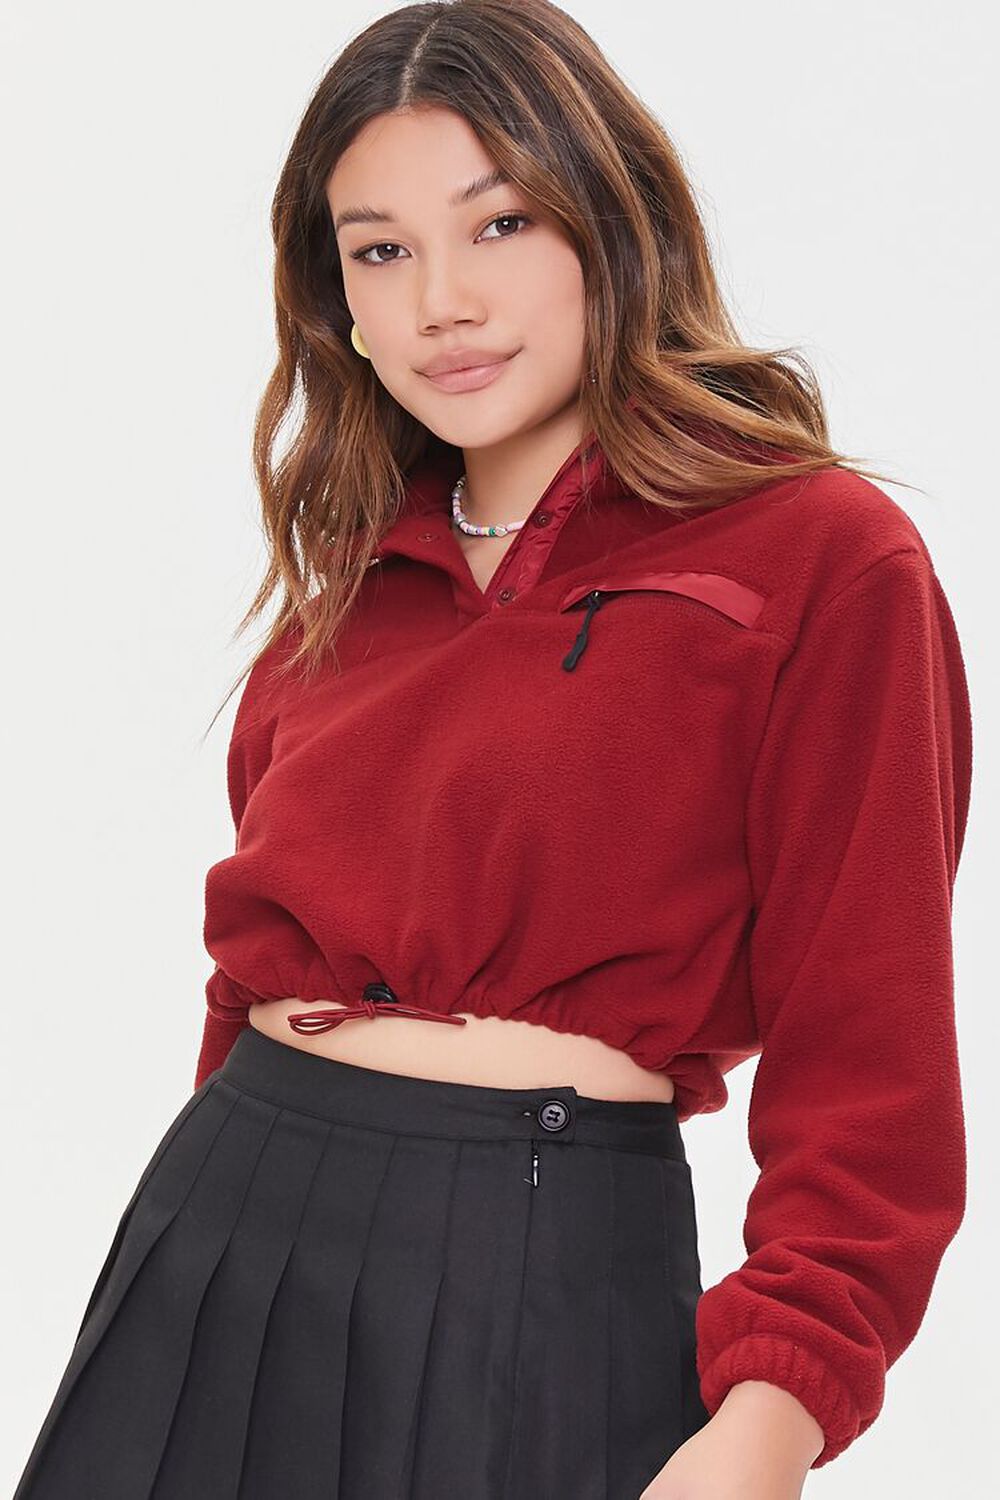 BROWN Cropped Fleece Pullover, image 1